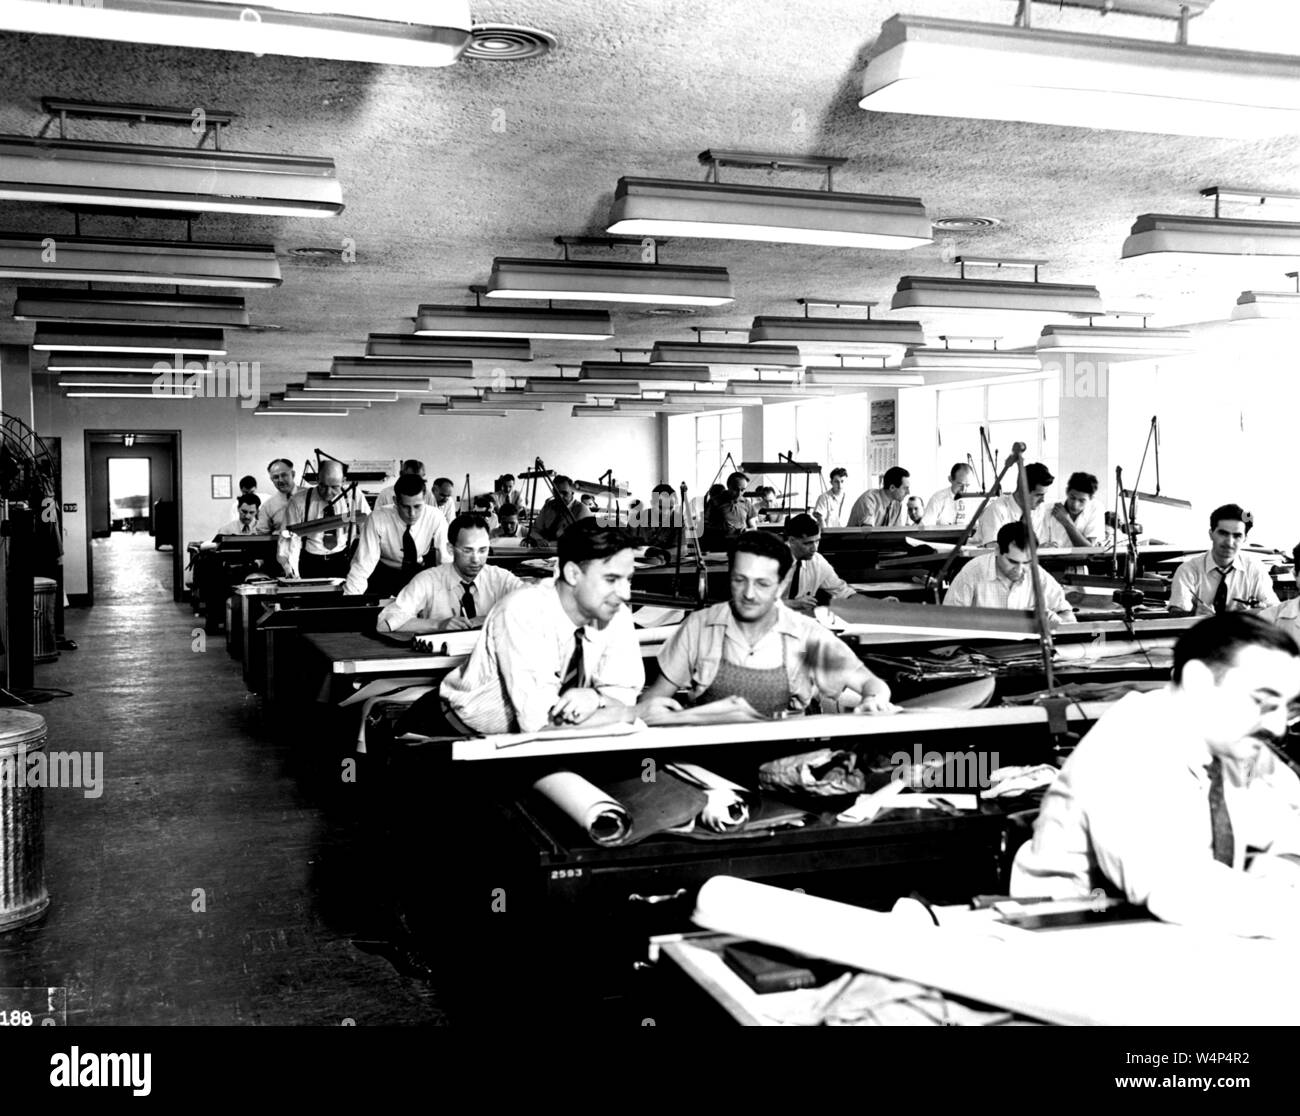 Men work in the Drafting Room, Aircraft Engine Research Laboratory, John H. Glenn Research Center, Cleveland, Ohio, September 21, 1942. Image courtesy National Aeronautics and Space Administration (NASA). () Stock Photo